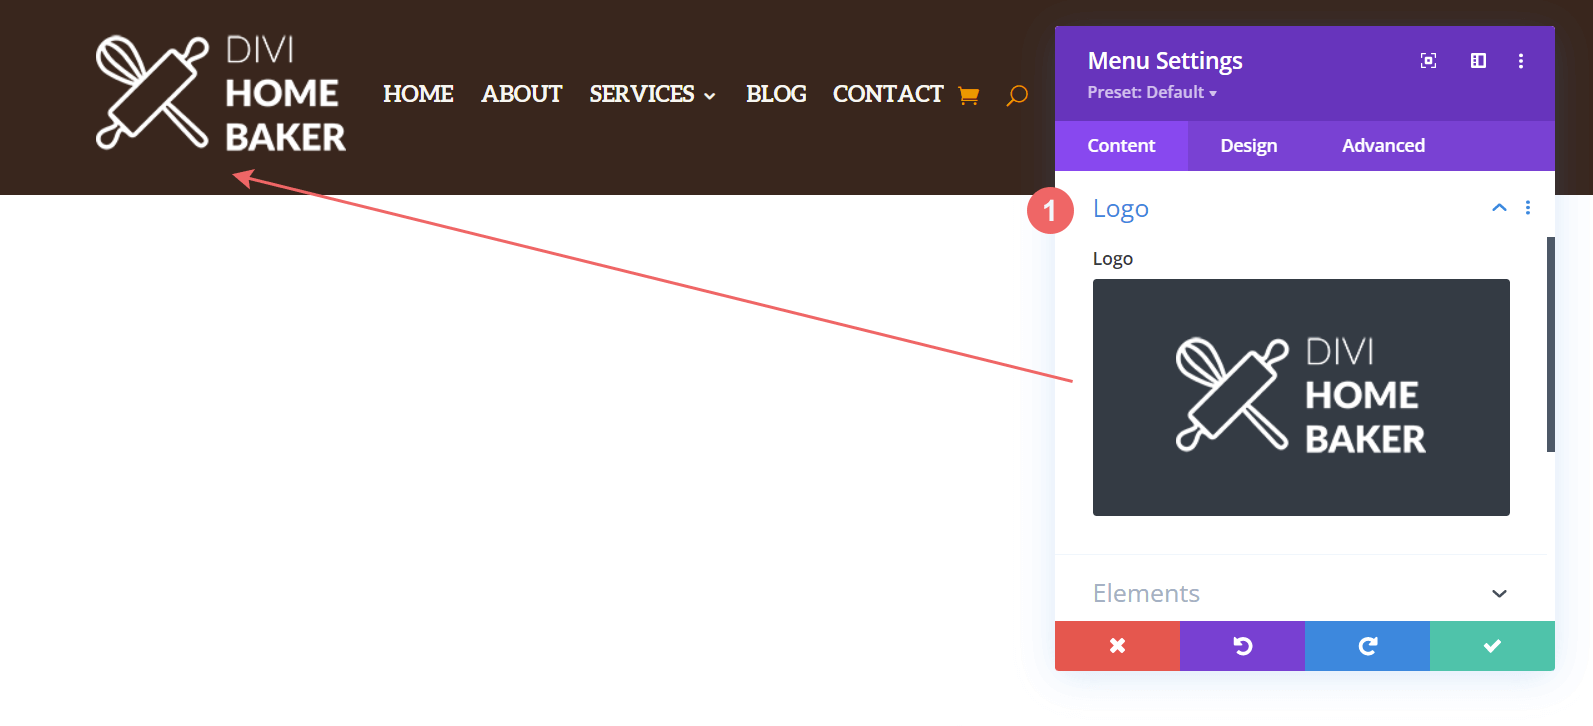 Select a logo for use within the Menu Module